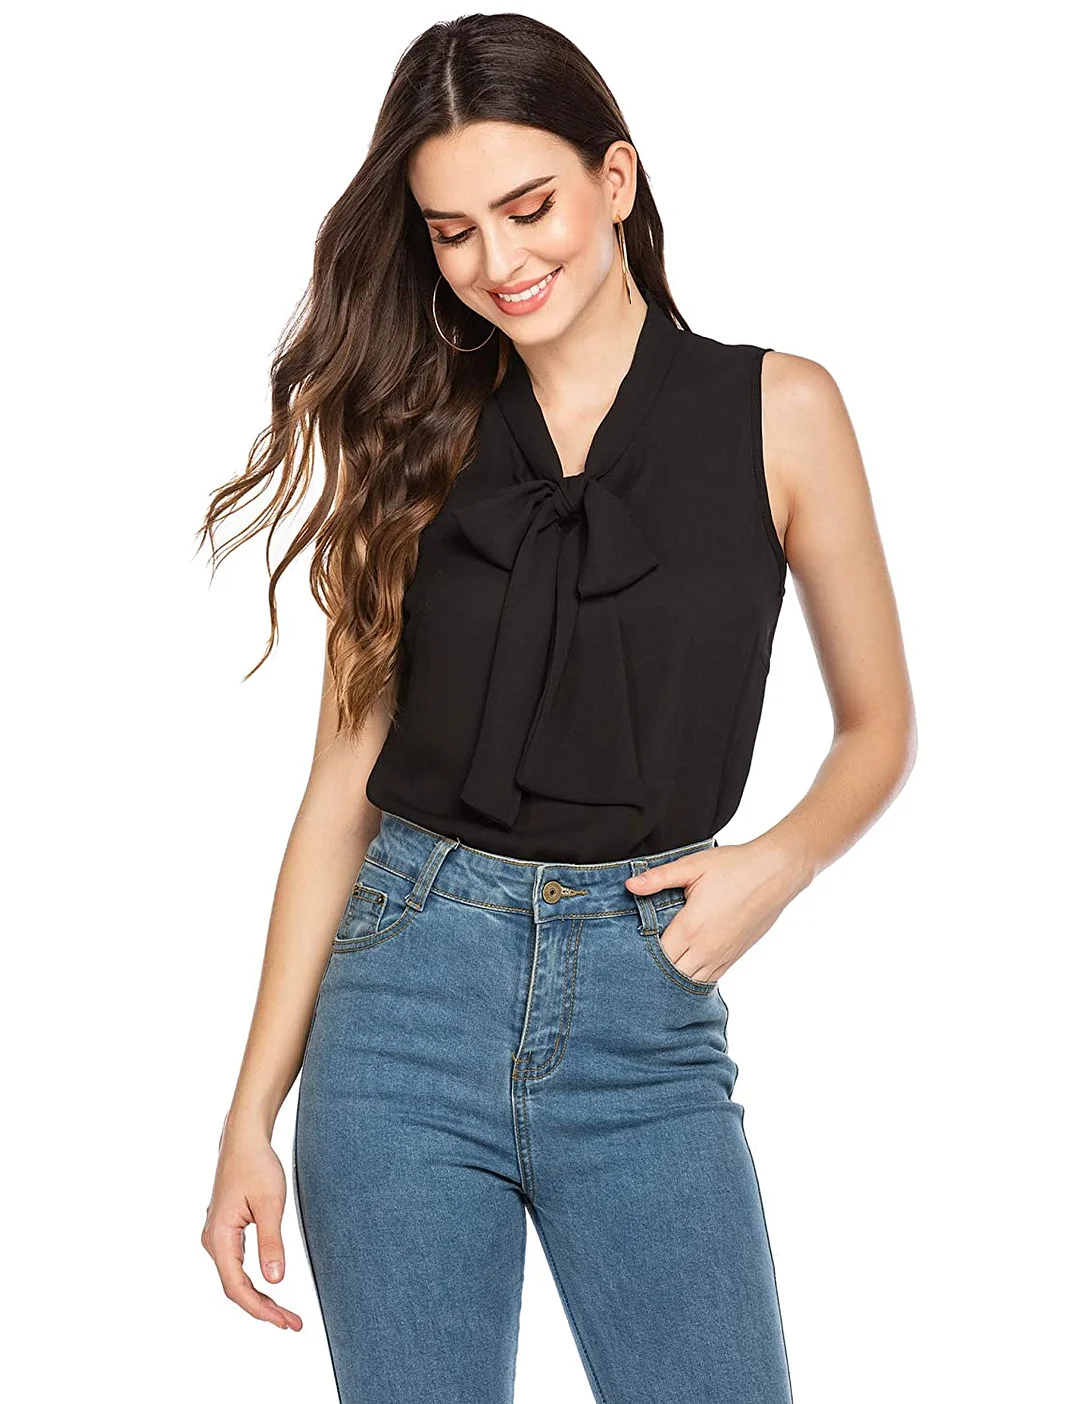 Women's Casual Tie Bow Neck Sleeveless Chiffon Solid Blouse Office Work Elegant Shirt Vintage Basic Tops